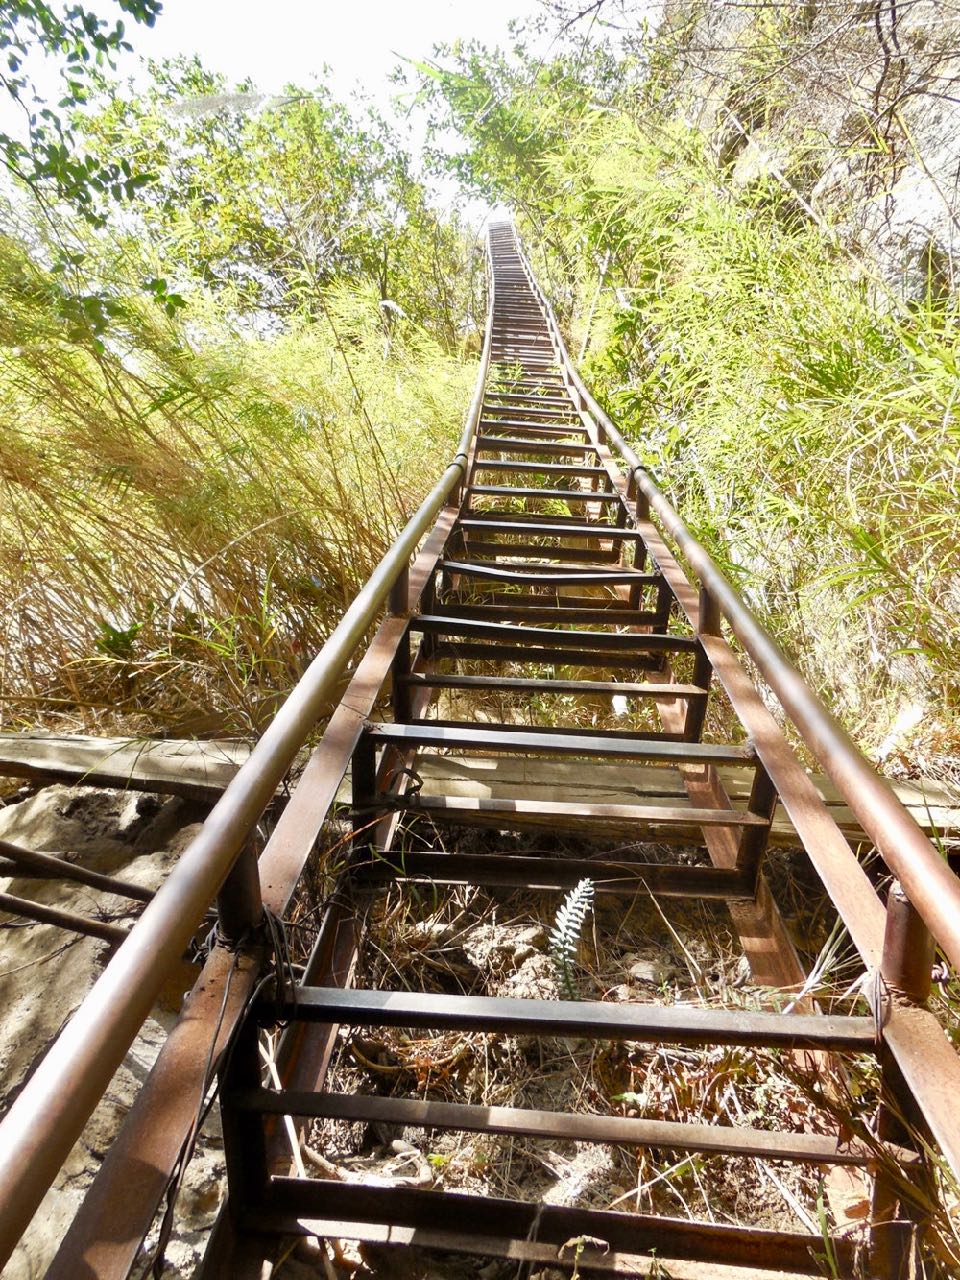 tiger-leaping-gorge-ladder